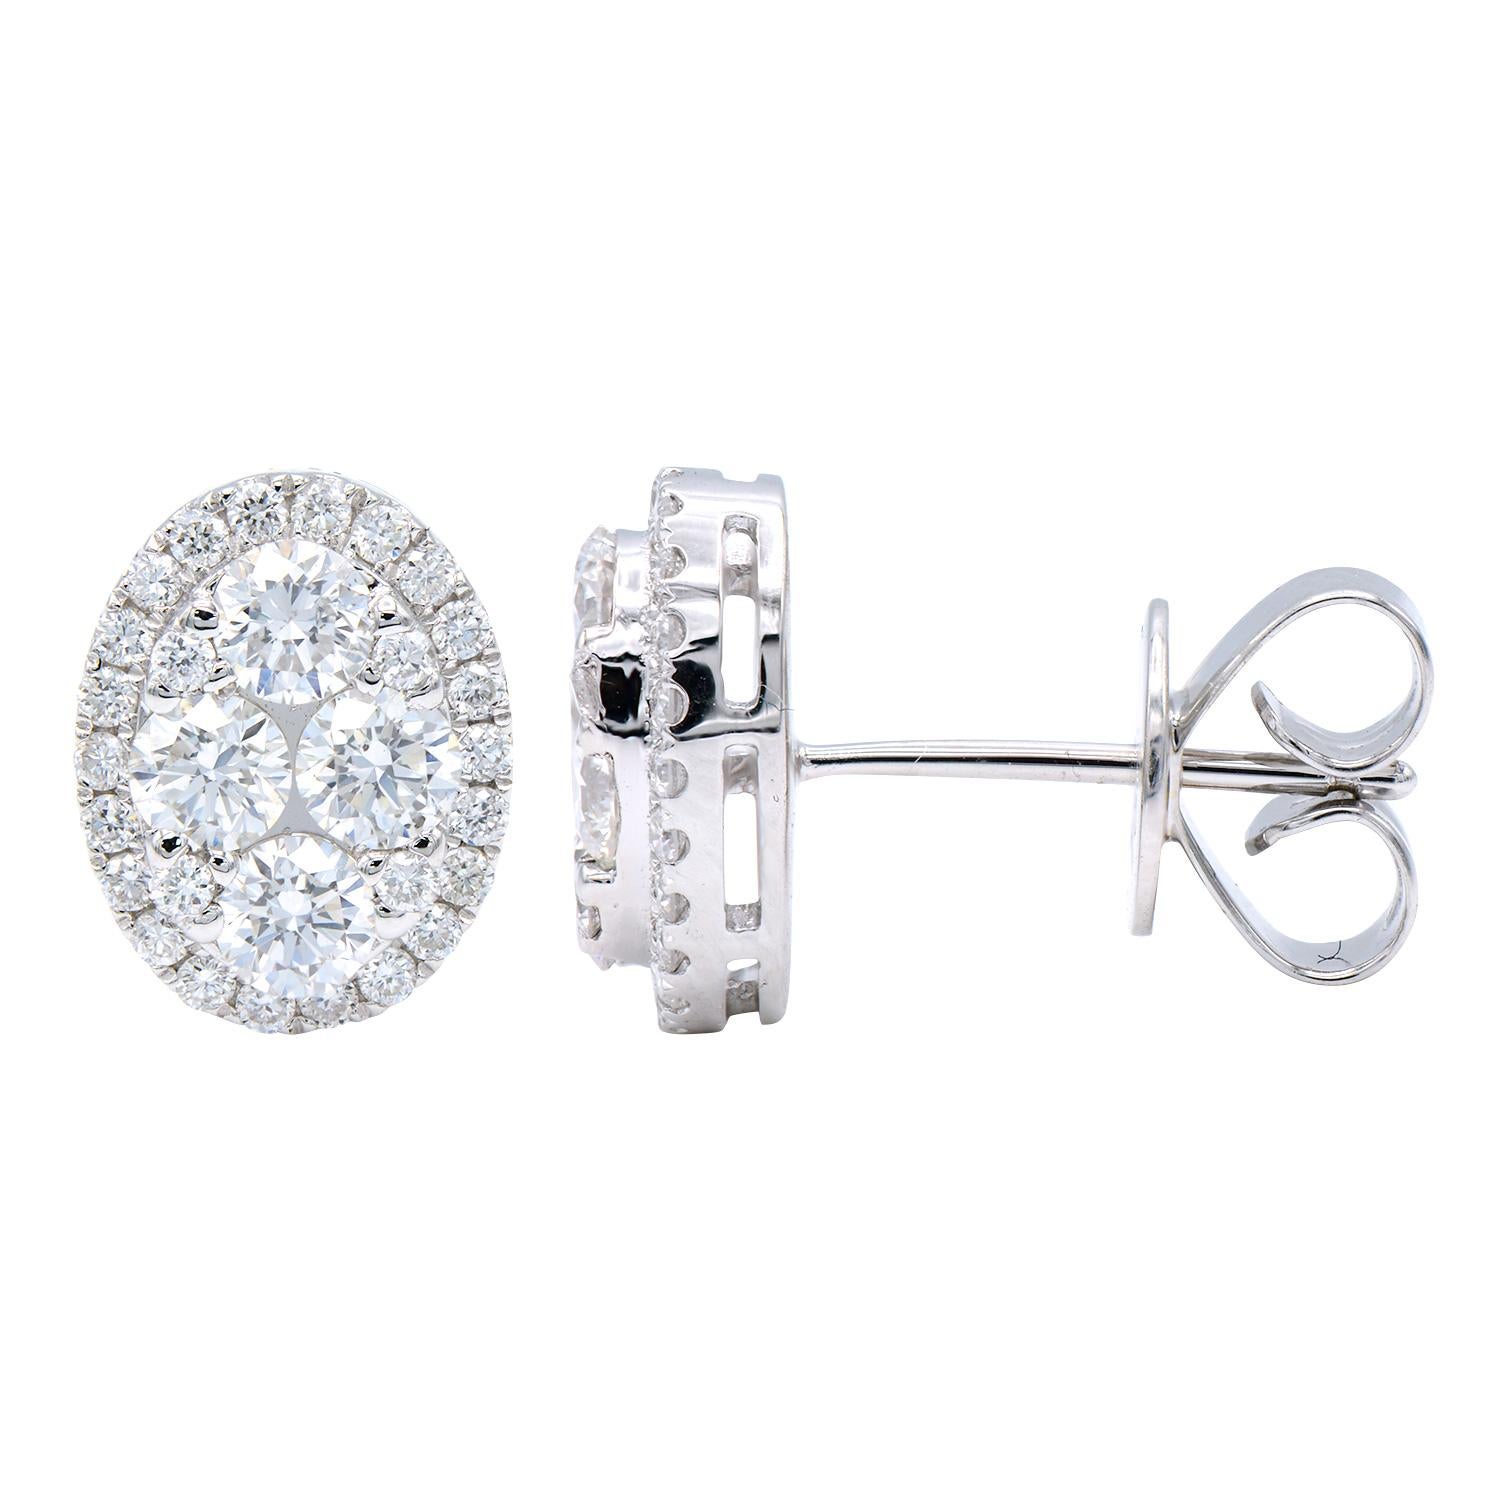 These stunning diamond cluster earrings are oval shaped. The inside is made from 4 larger diamonds and 4 smaller diamonds which are all surrounded by a diamond halo. There is a total of 60 round VS2, G color diamonds totaling 1.09 carats. These